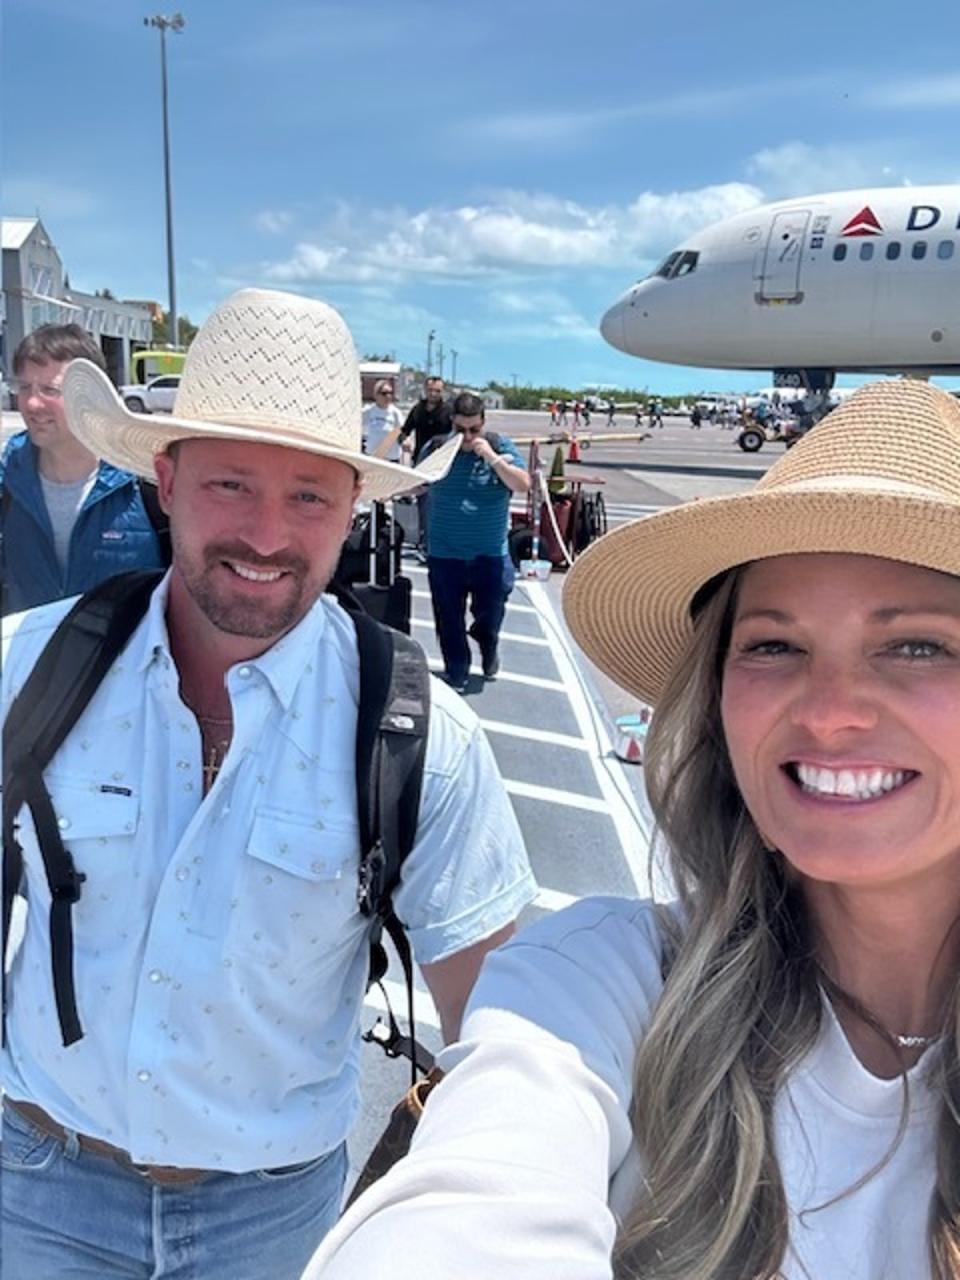 Ryan and Valerie Watson, pictured arriving in Turks and Caicos last month, were stopped by airport security on their way home from birthday celebrations in Turks & Caicos after hunting ammunition was found in their luggage (Valerie Watson)